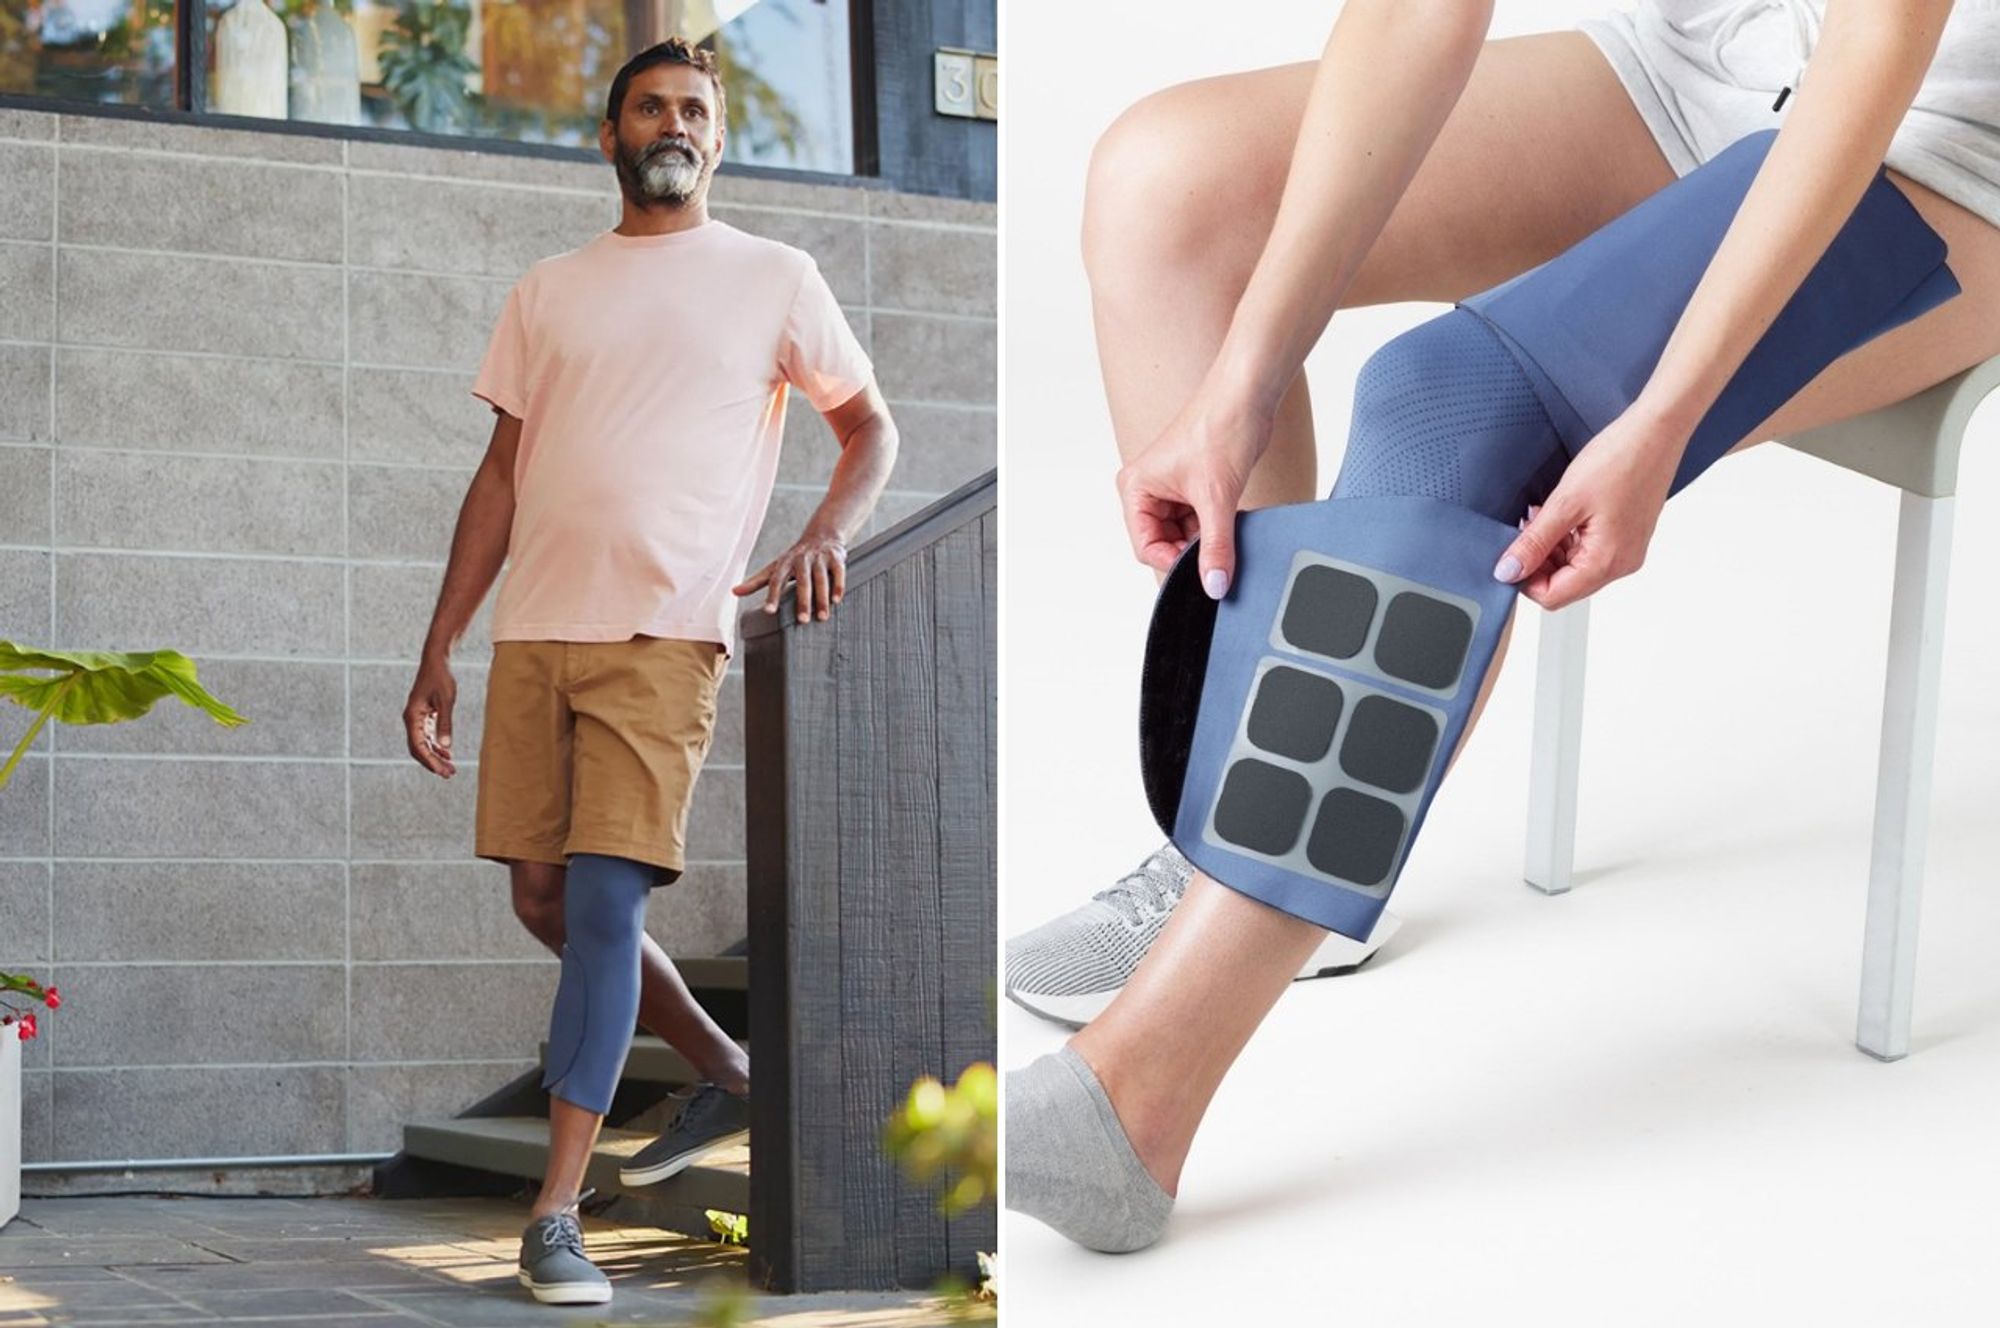 Fuseproject’s bionic leg wearable improves lives of those living with mobility difficulties using AI - Yanko Design